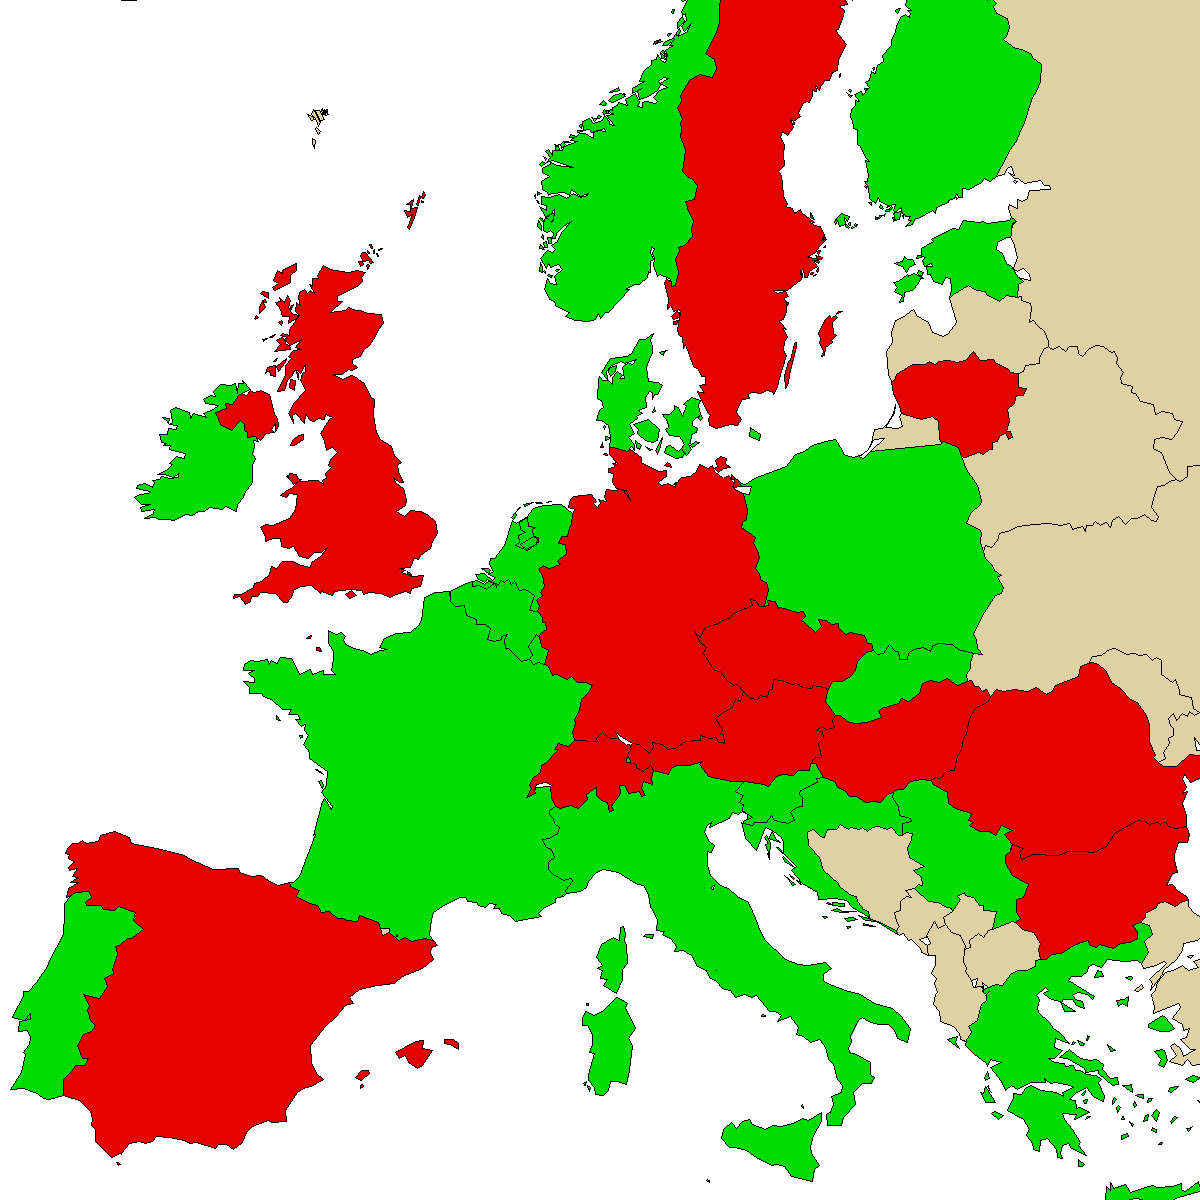 legal info map for our product O-PCE, green are countries with no ban, red with ban, grey is unknown